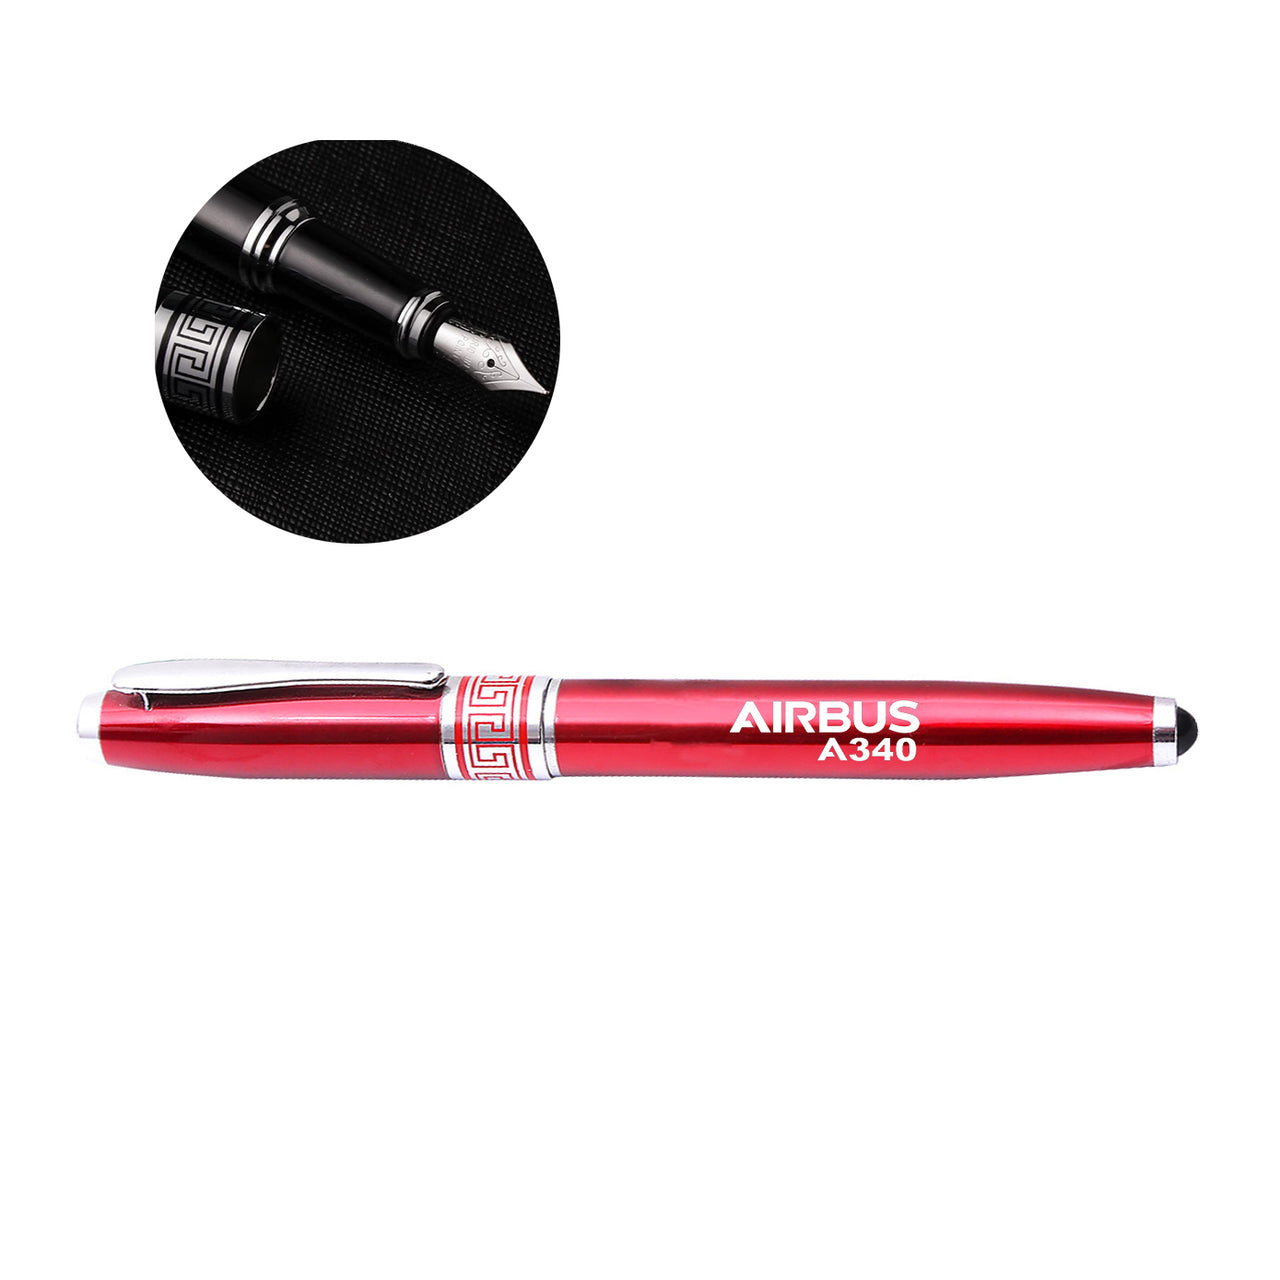 Airbus A340 & Text Designed Pens